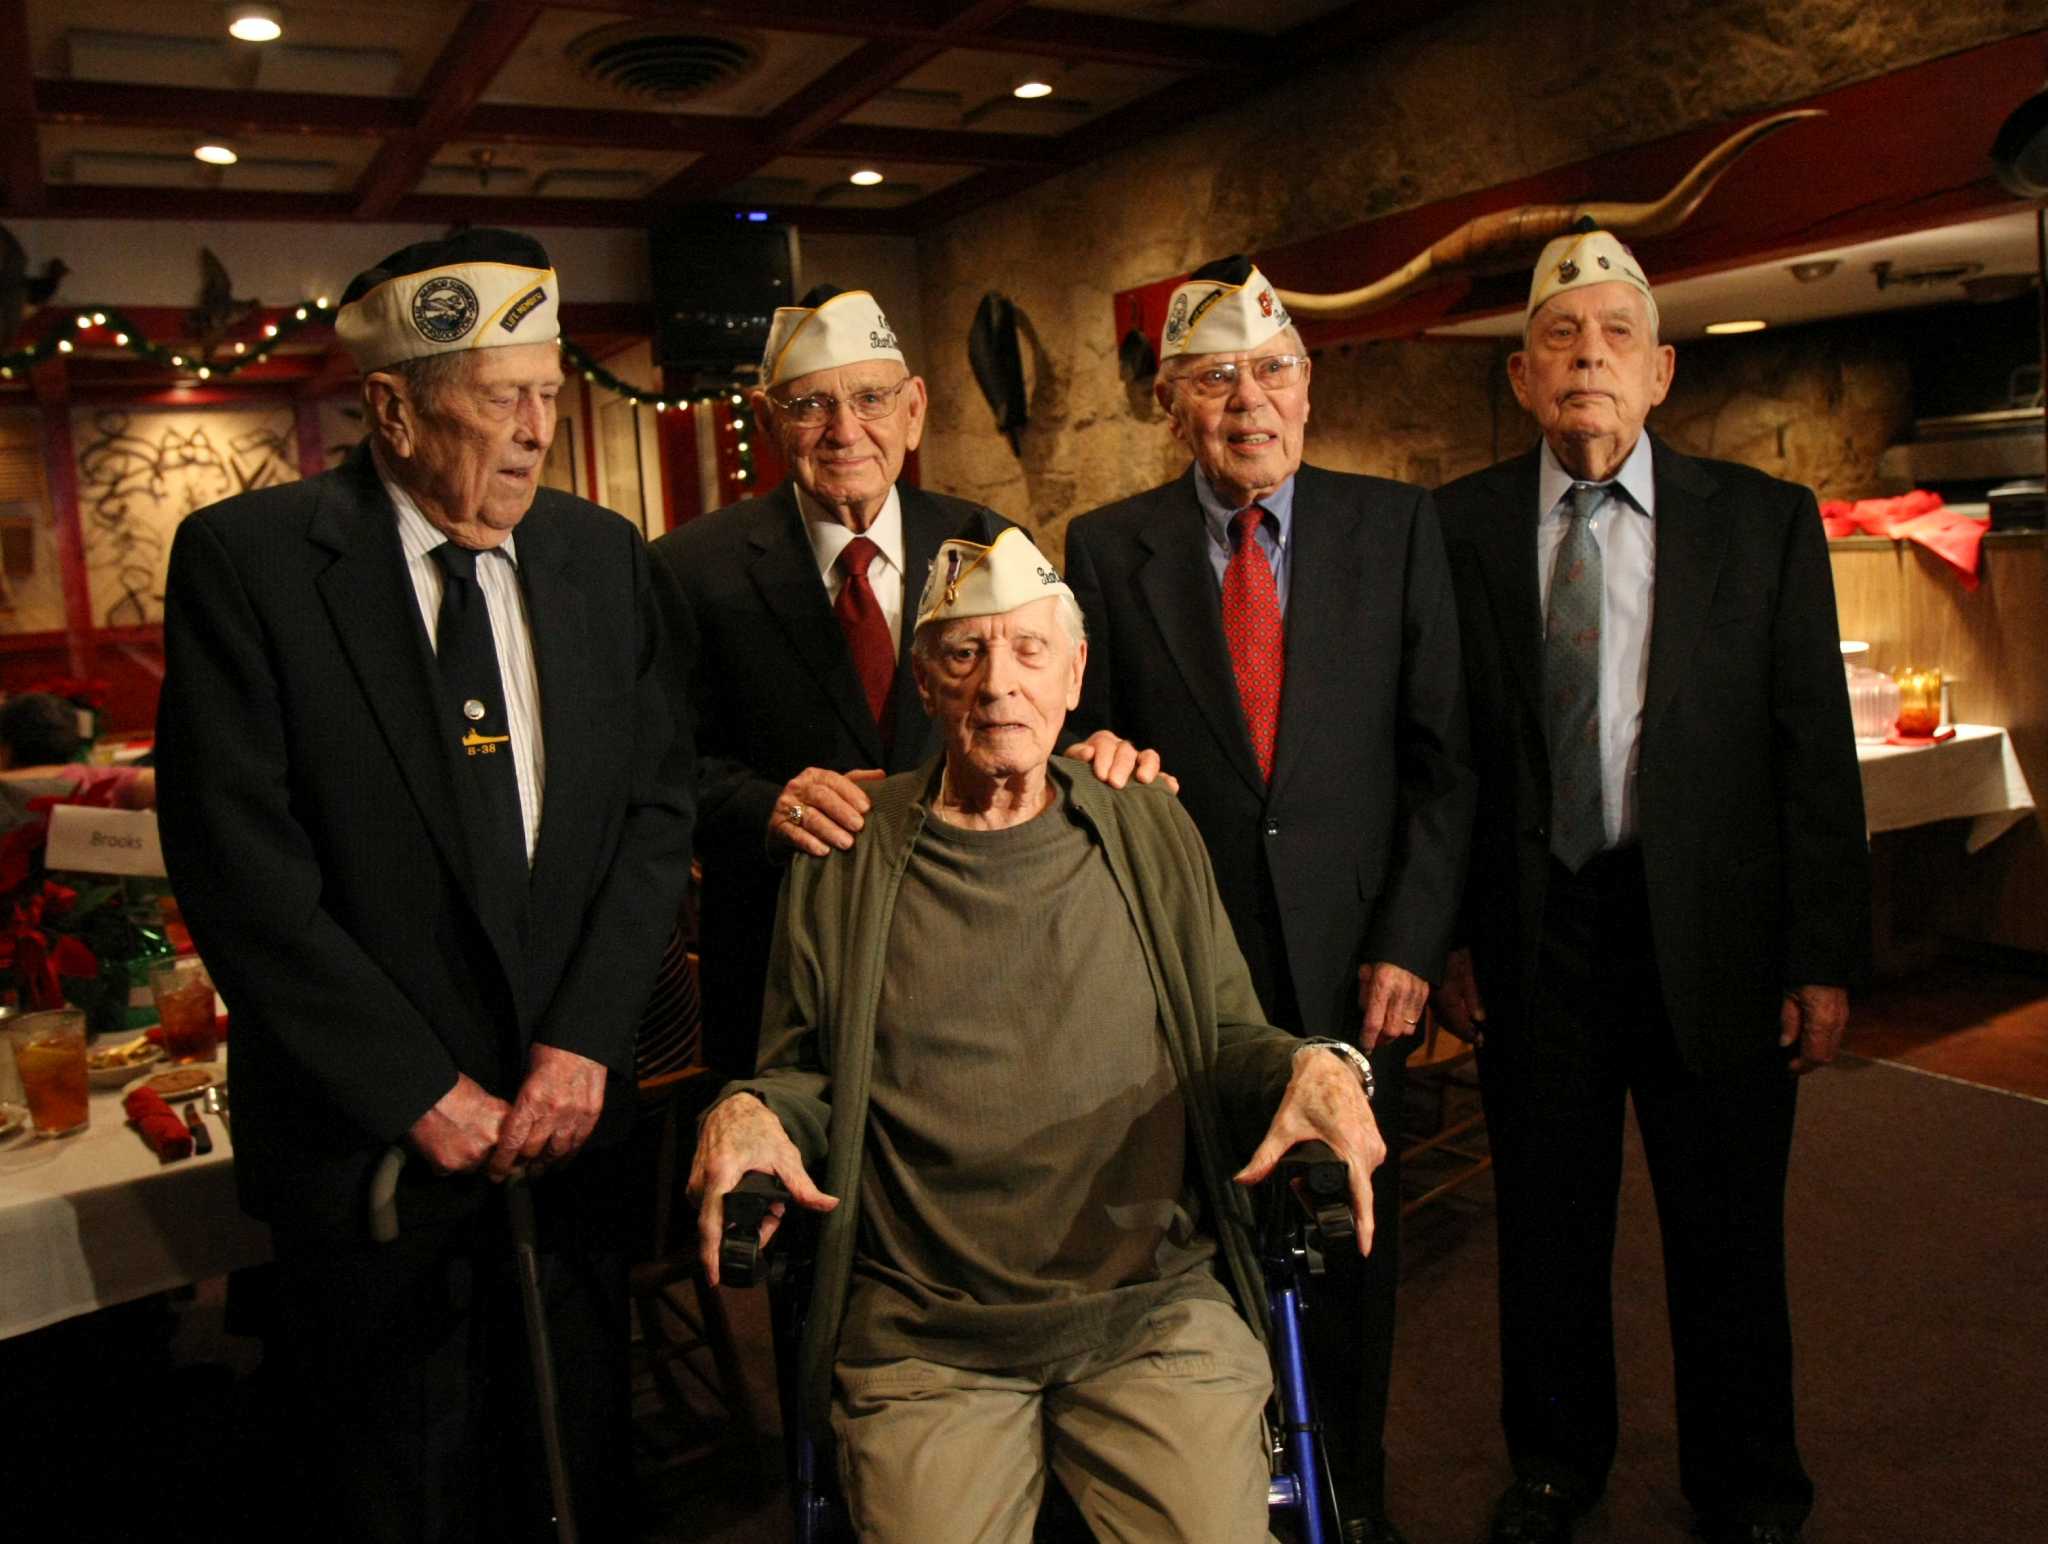 Five Pearl Harbor veterans honored at annual lunch - San Antonio Express-News2048 x 1544